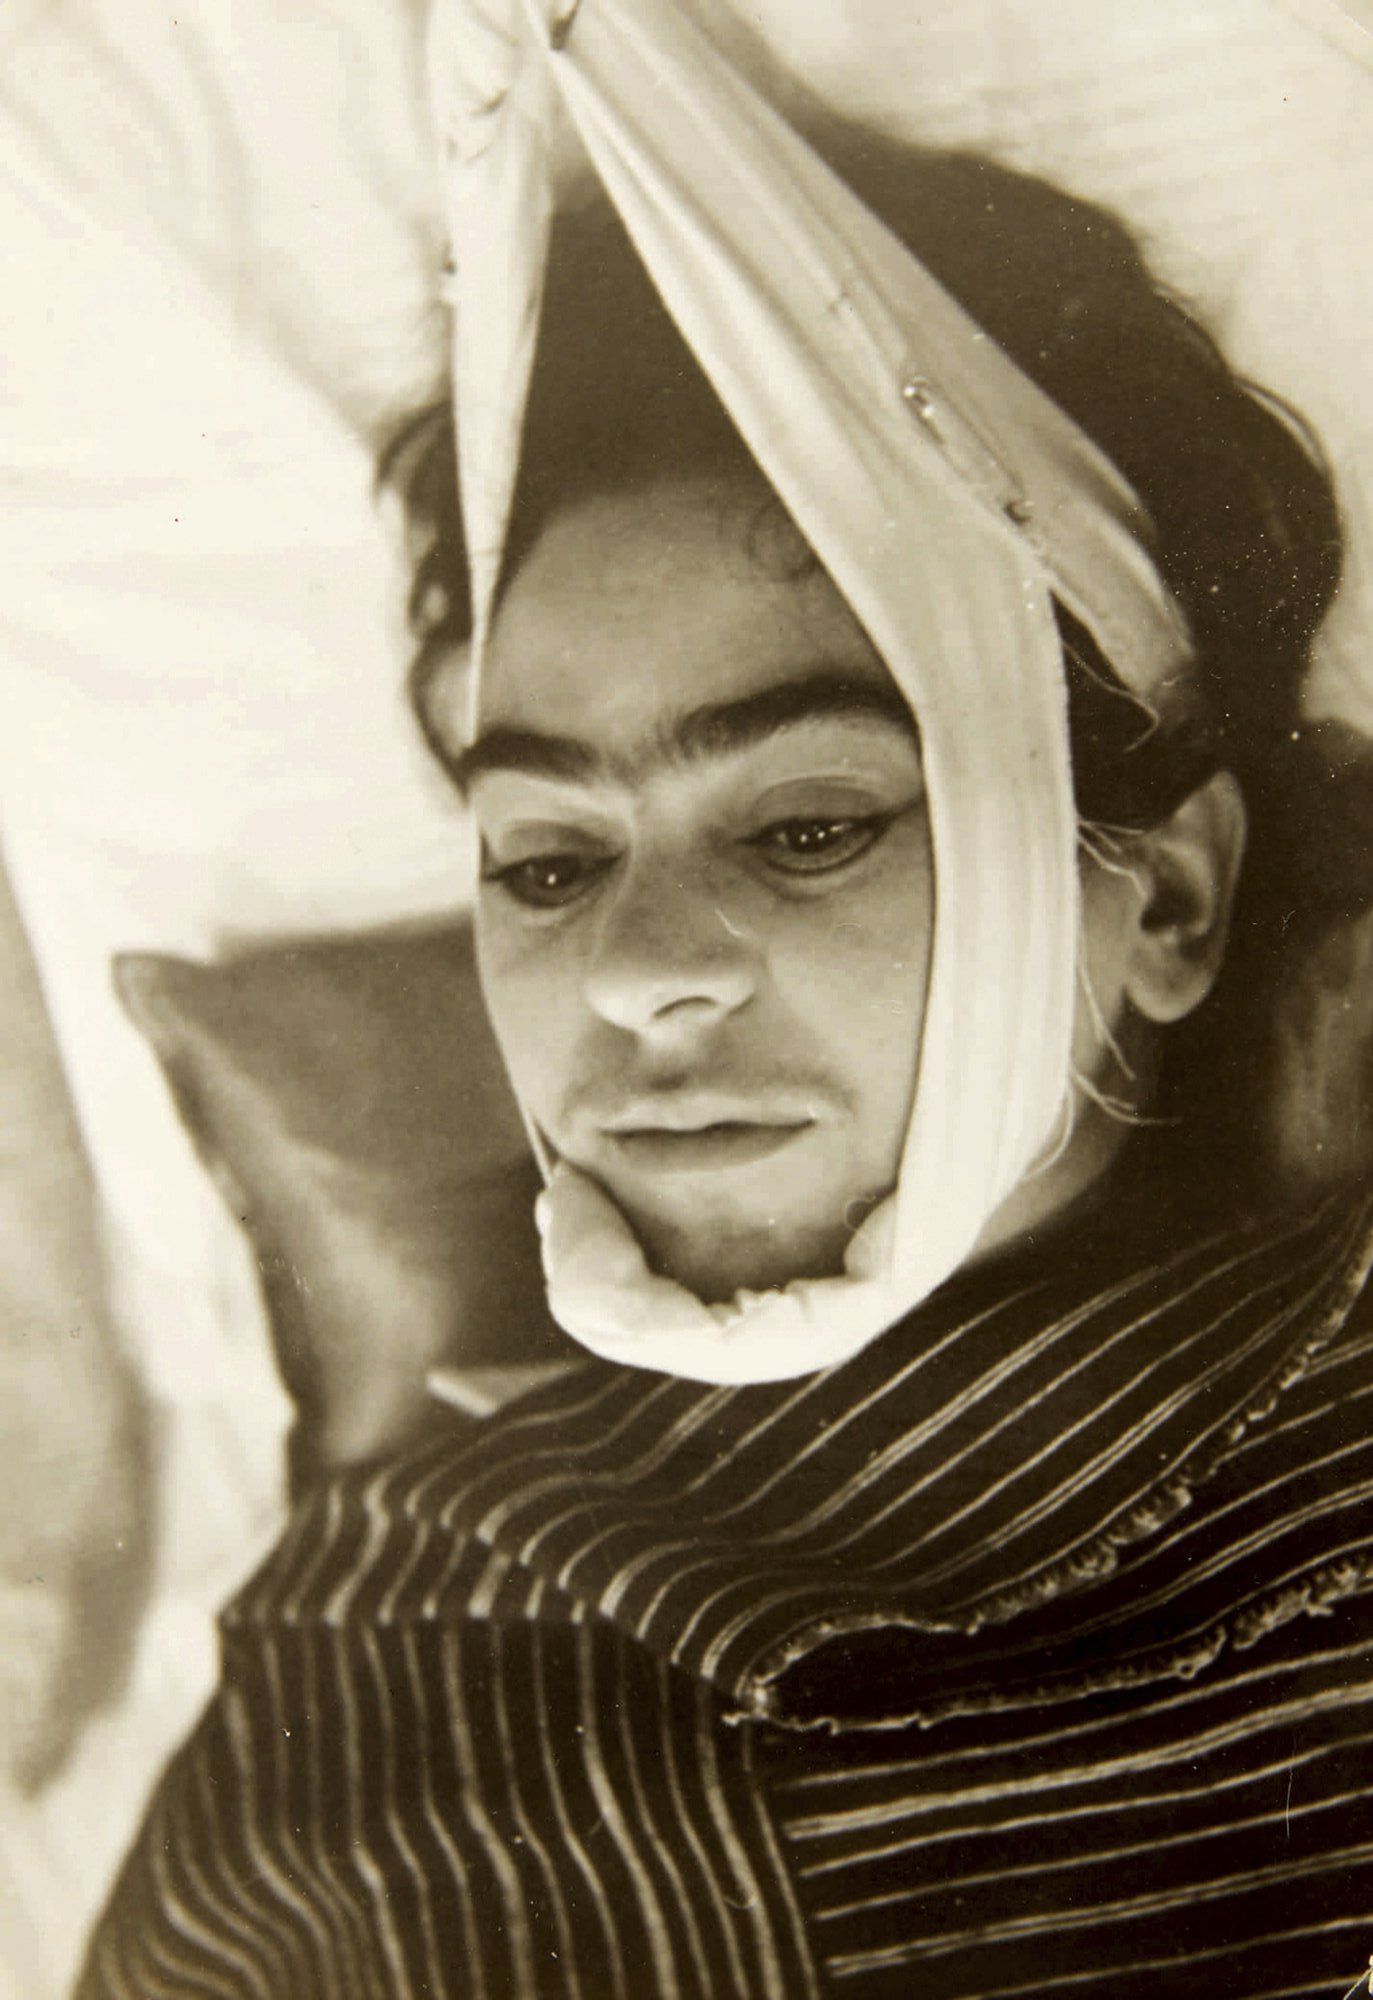 Unseen photos of Frida Kahlo by her lover to be auctioned